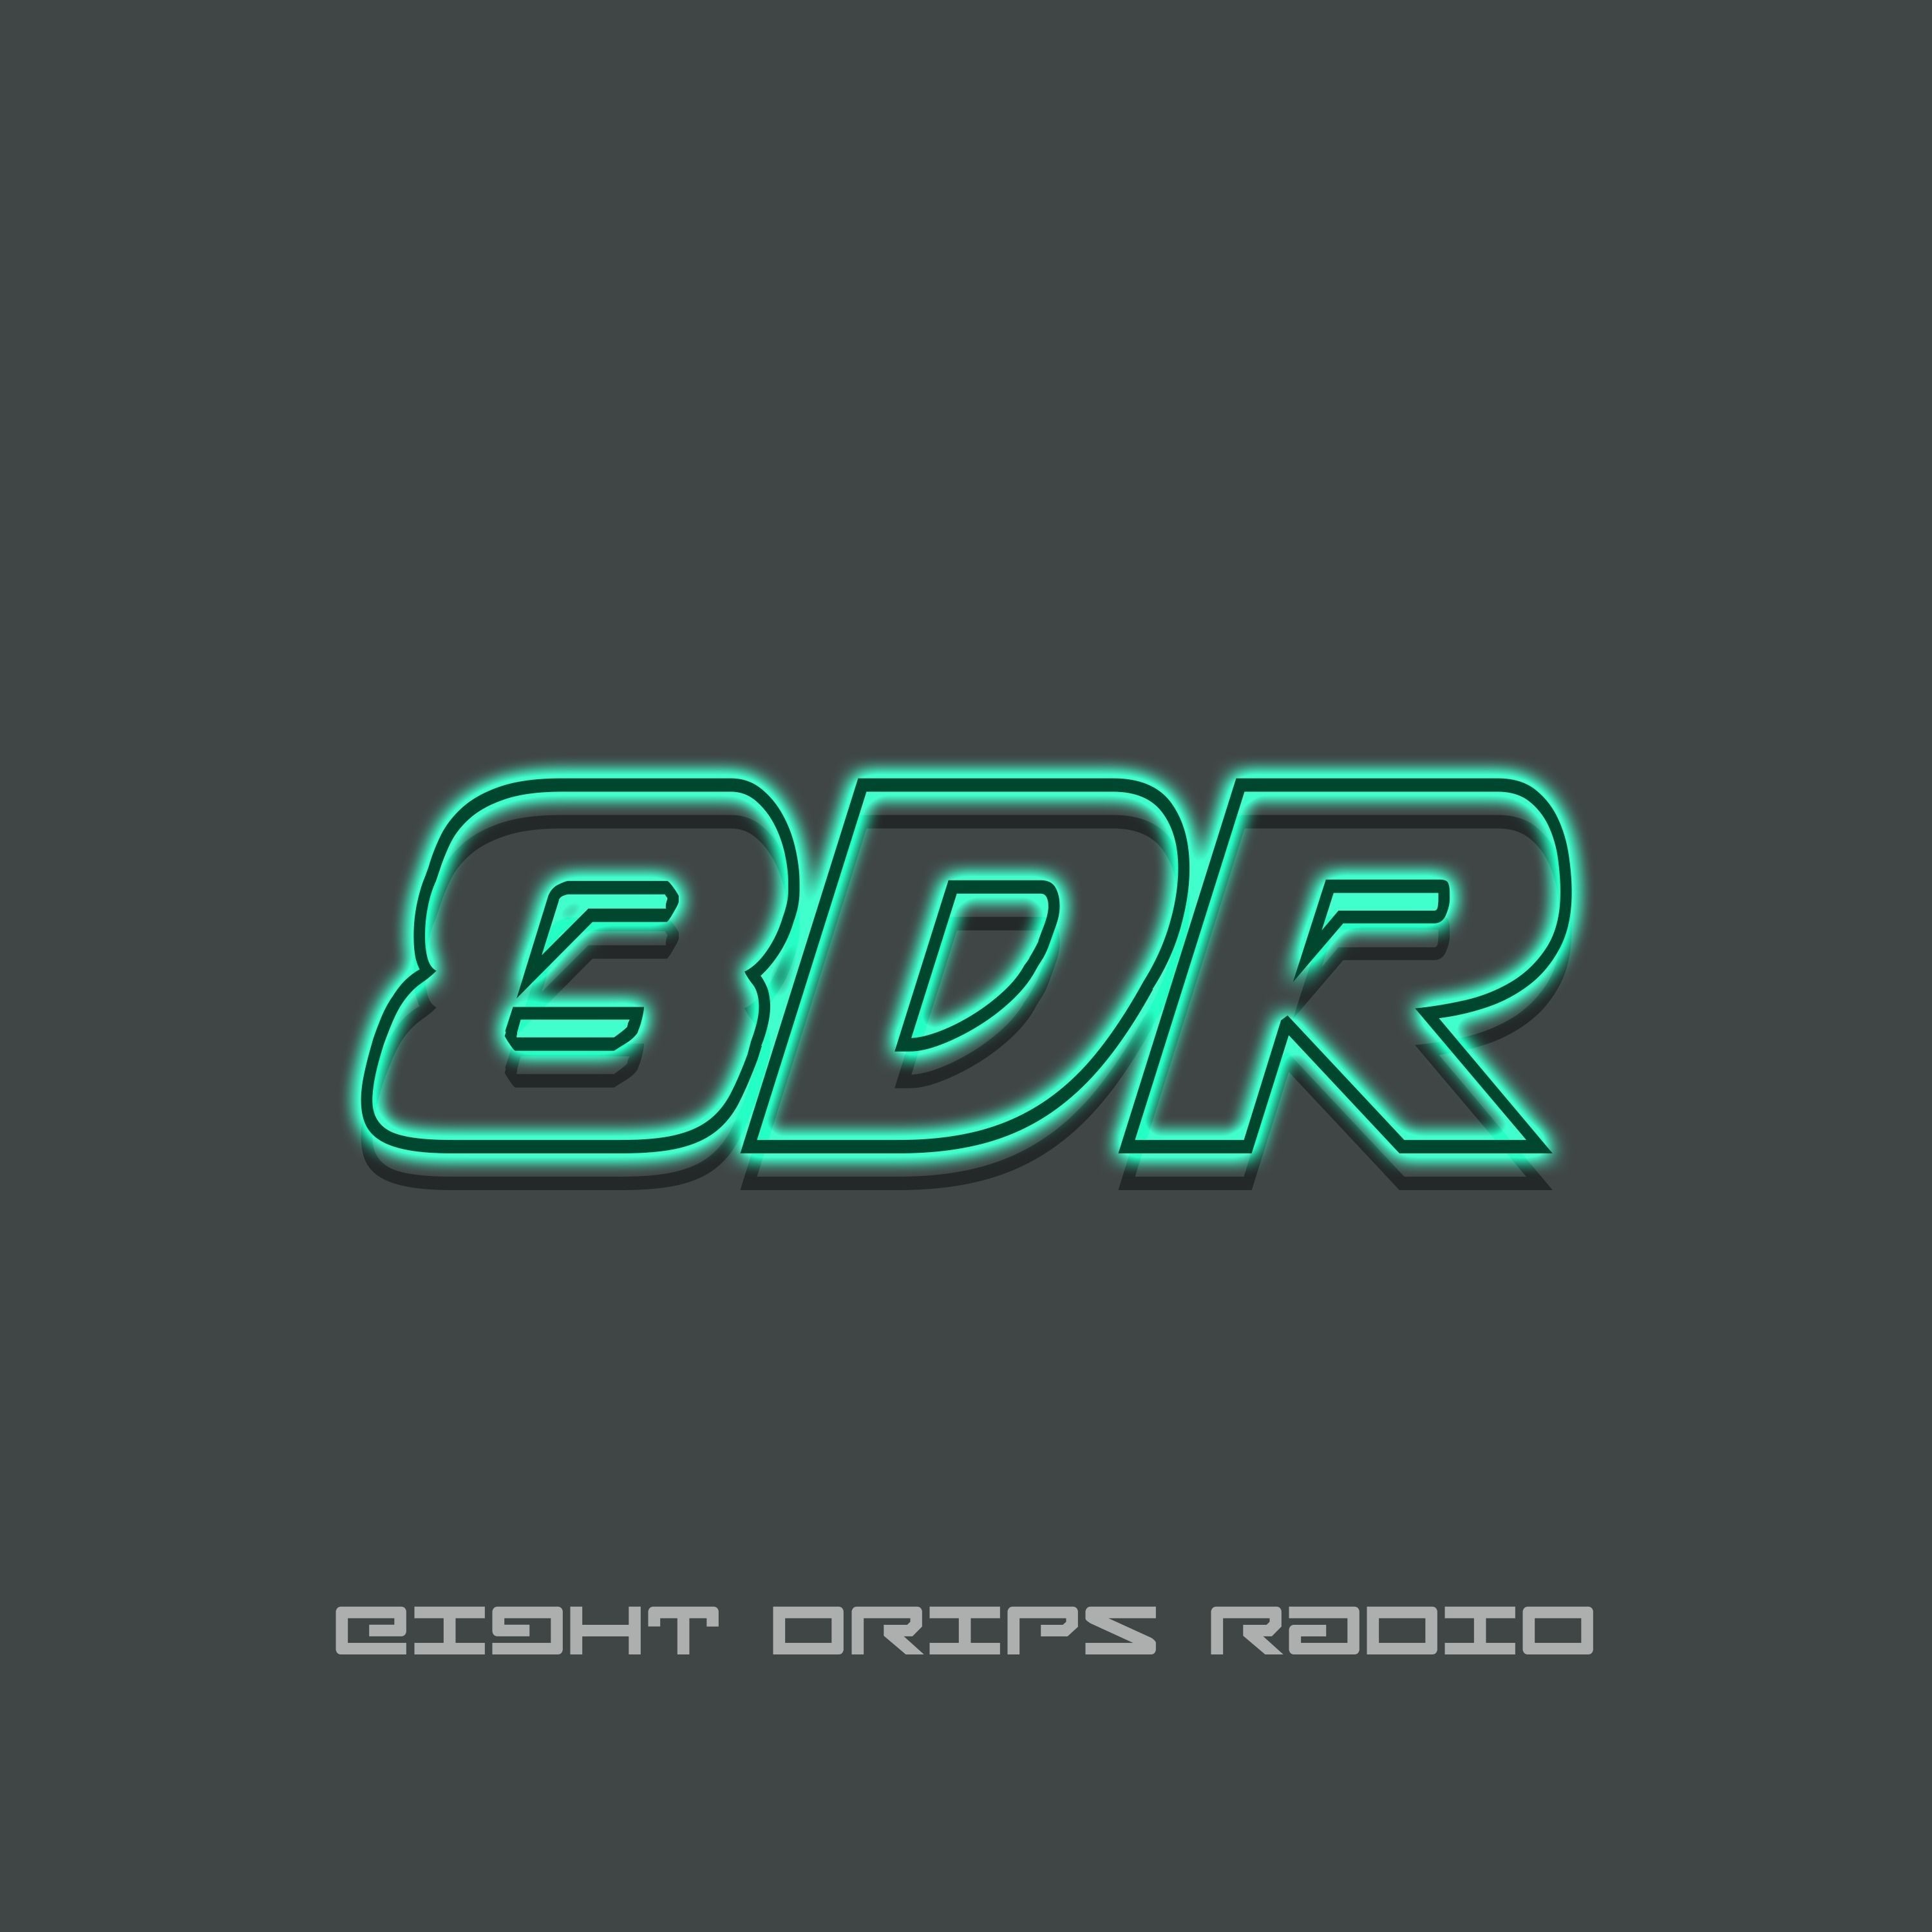 EIGHT DRIPS RADIO Episode 016 - Again with Dope Bangers with LEBLAENG